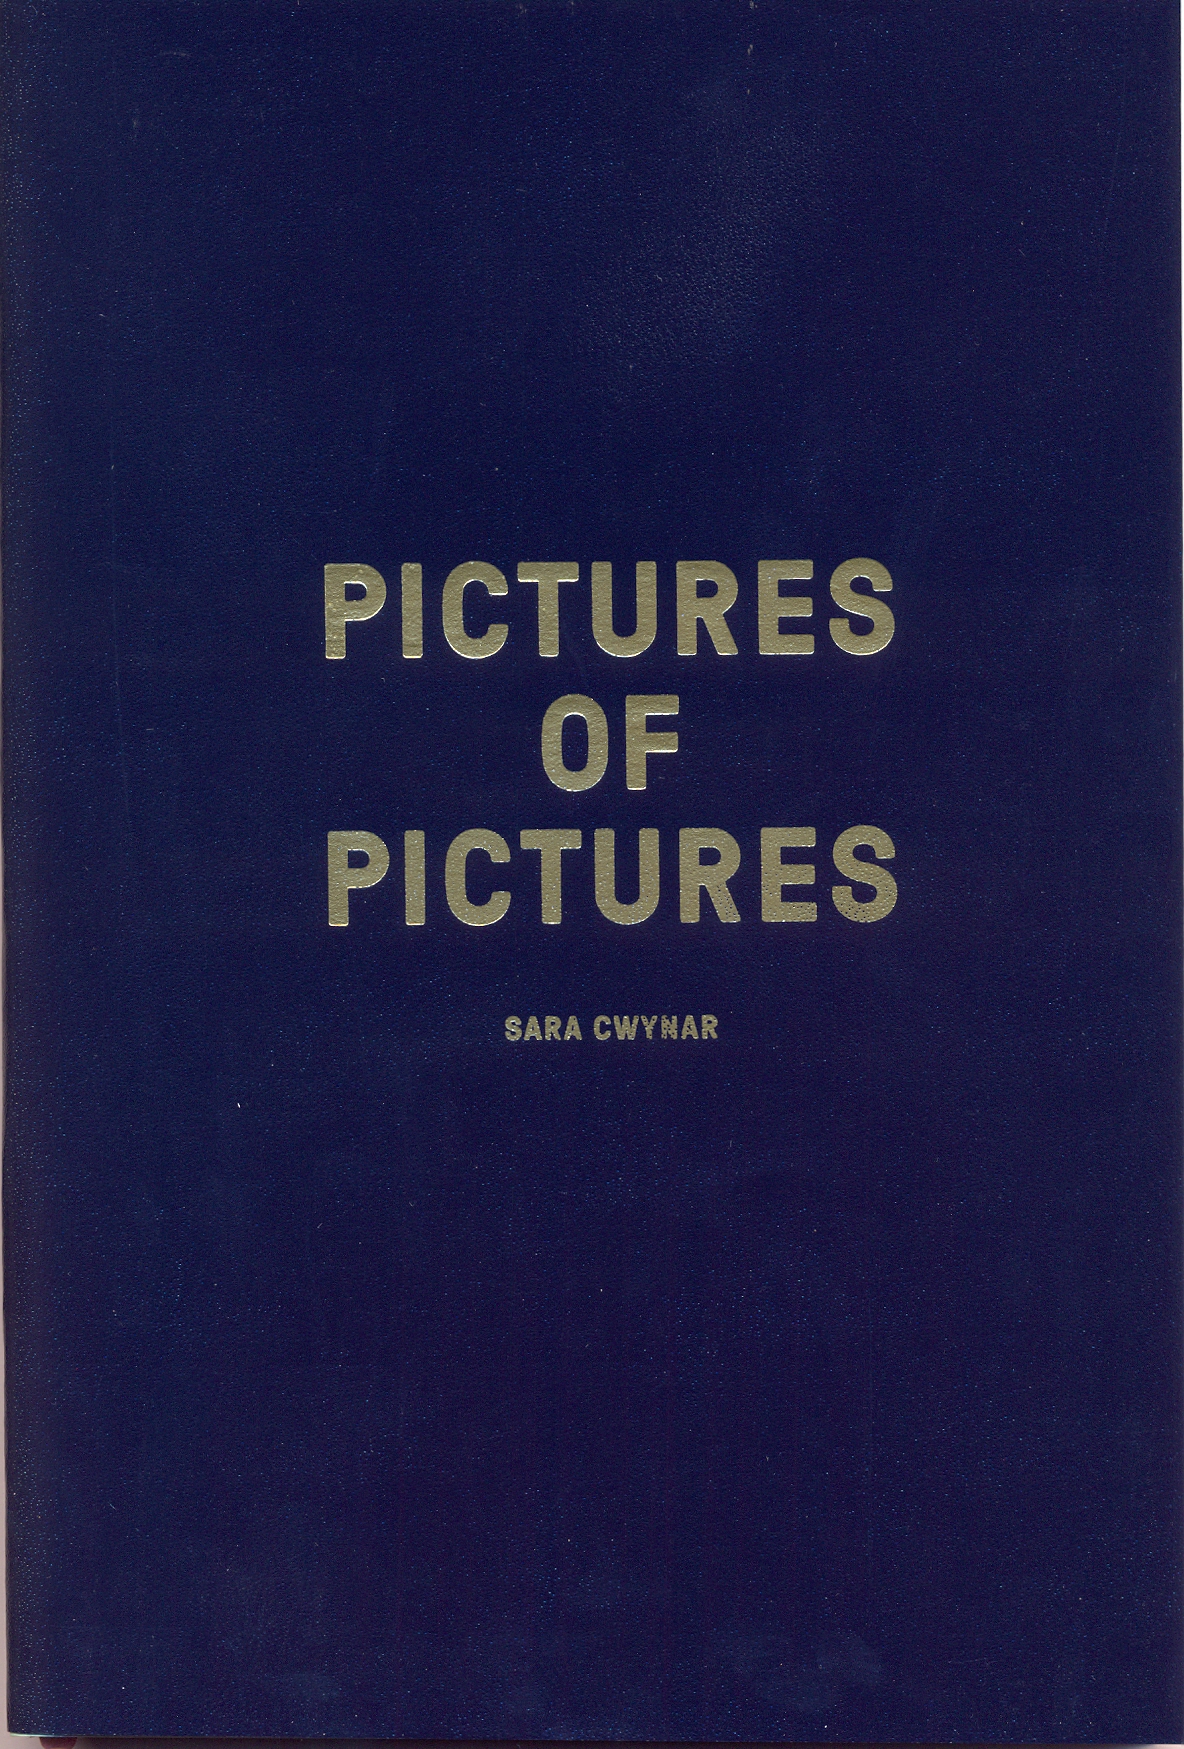 pictures-of-pictures